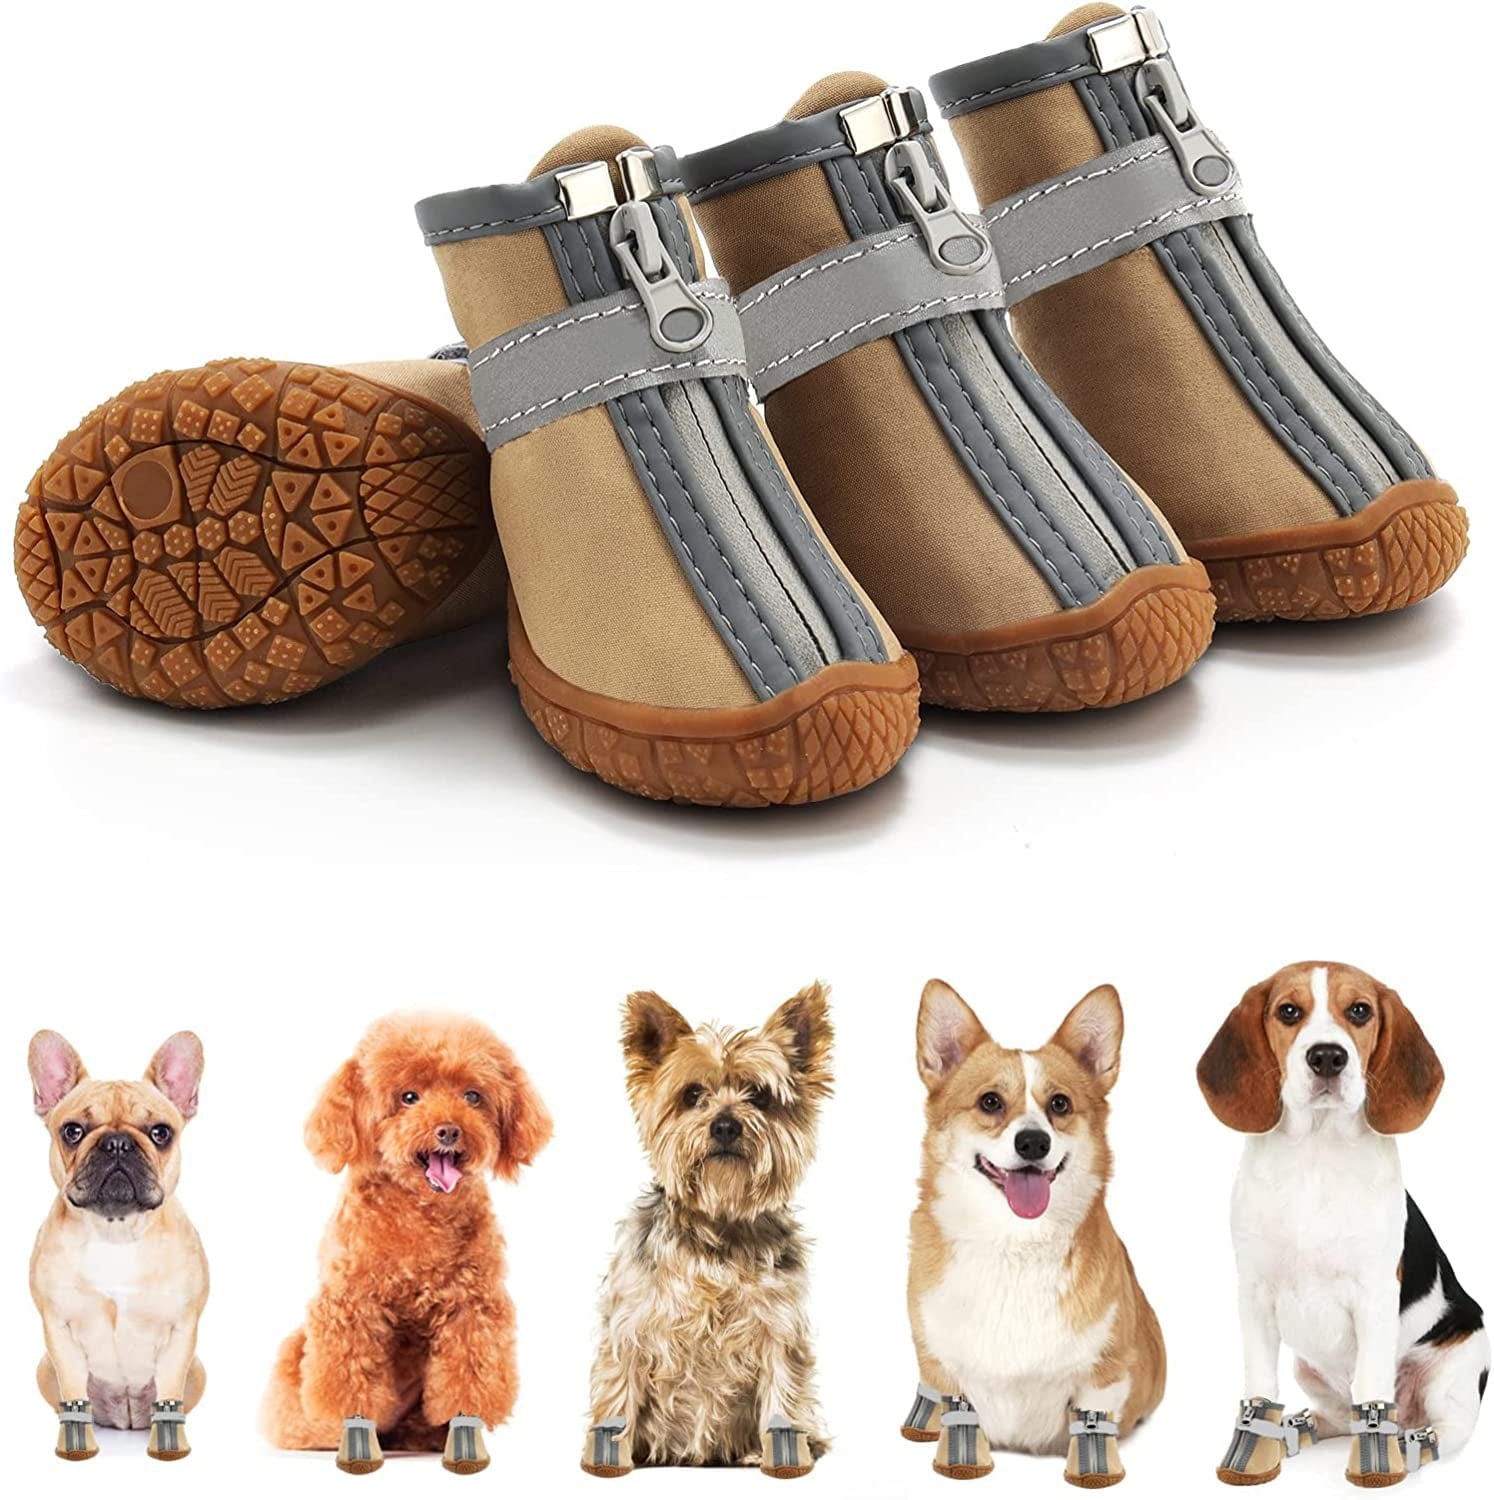 Dog Shoes, Waterproof Dog Boots, Small Dog Paw Protection Shoes With  Non-slip Sole, Breathable Sandals For Small Dogs (4 Pieces)